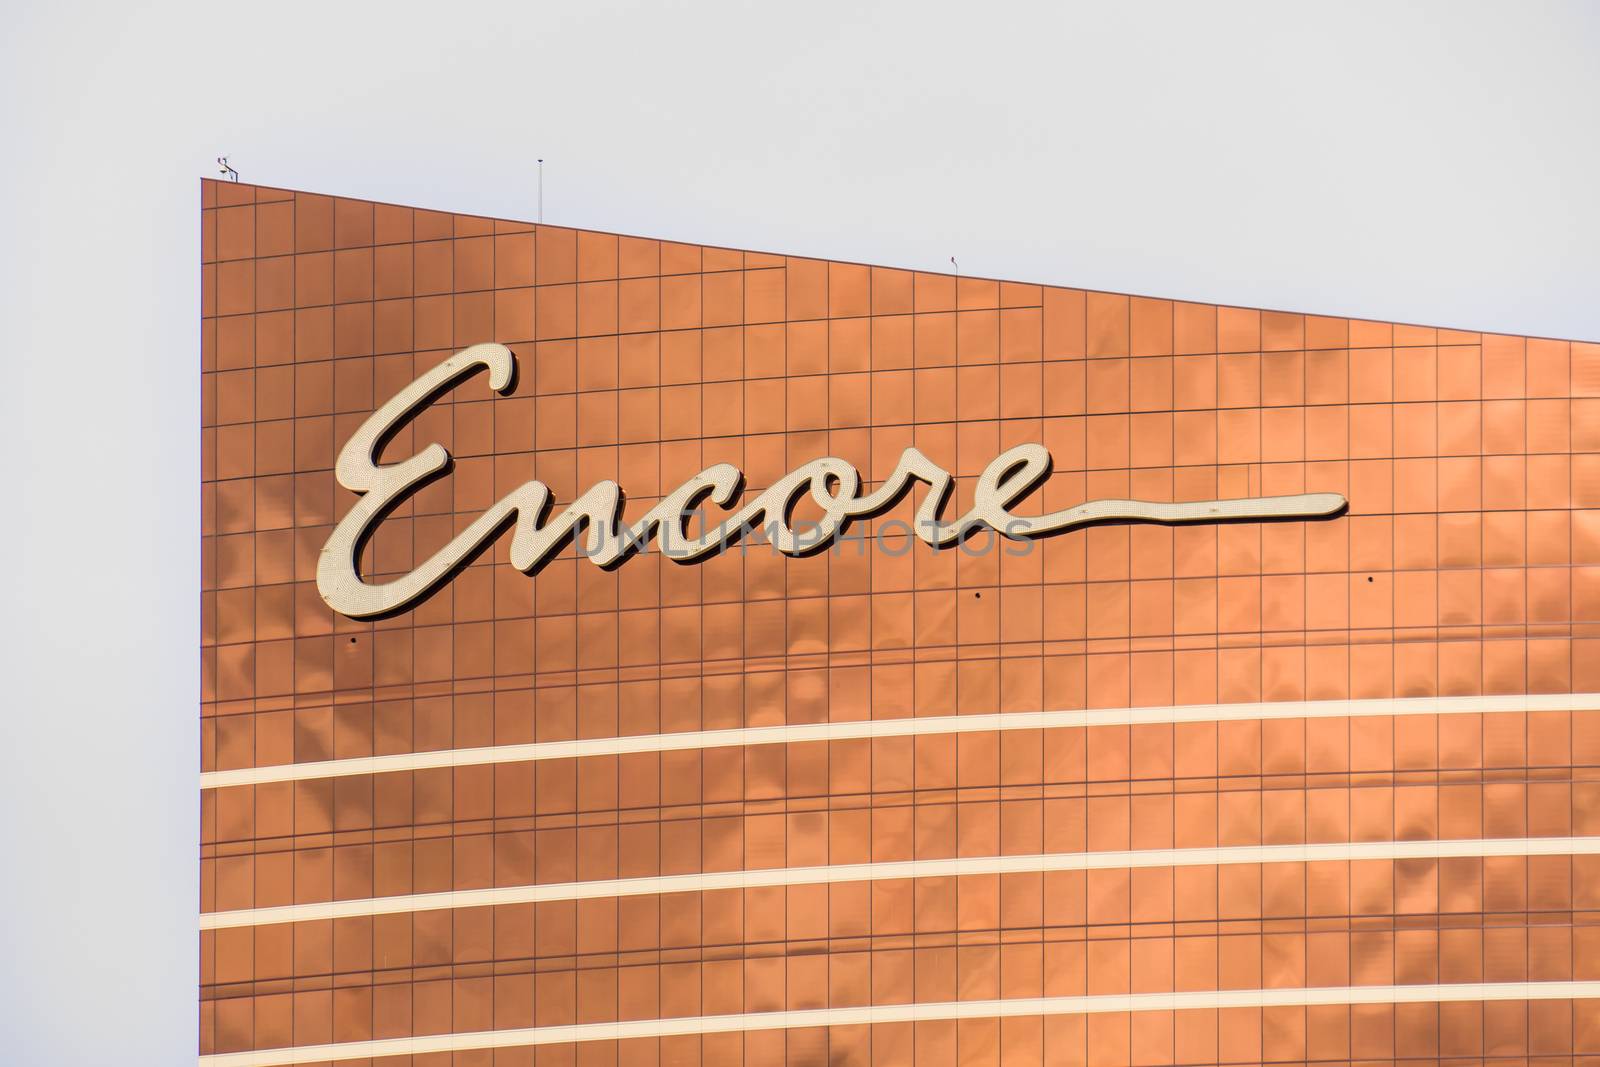 LAS VEGAS, NV/USA - FEBRUARY 14, 2016: Encore at Wynn Las Vegas luxury resort and casino located on the Las Vegas Strip. The Encore is named after casino developer Steve Wynn and is the flagship property of Wynn Resorts Limited.